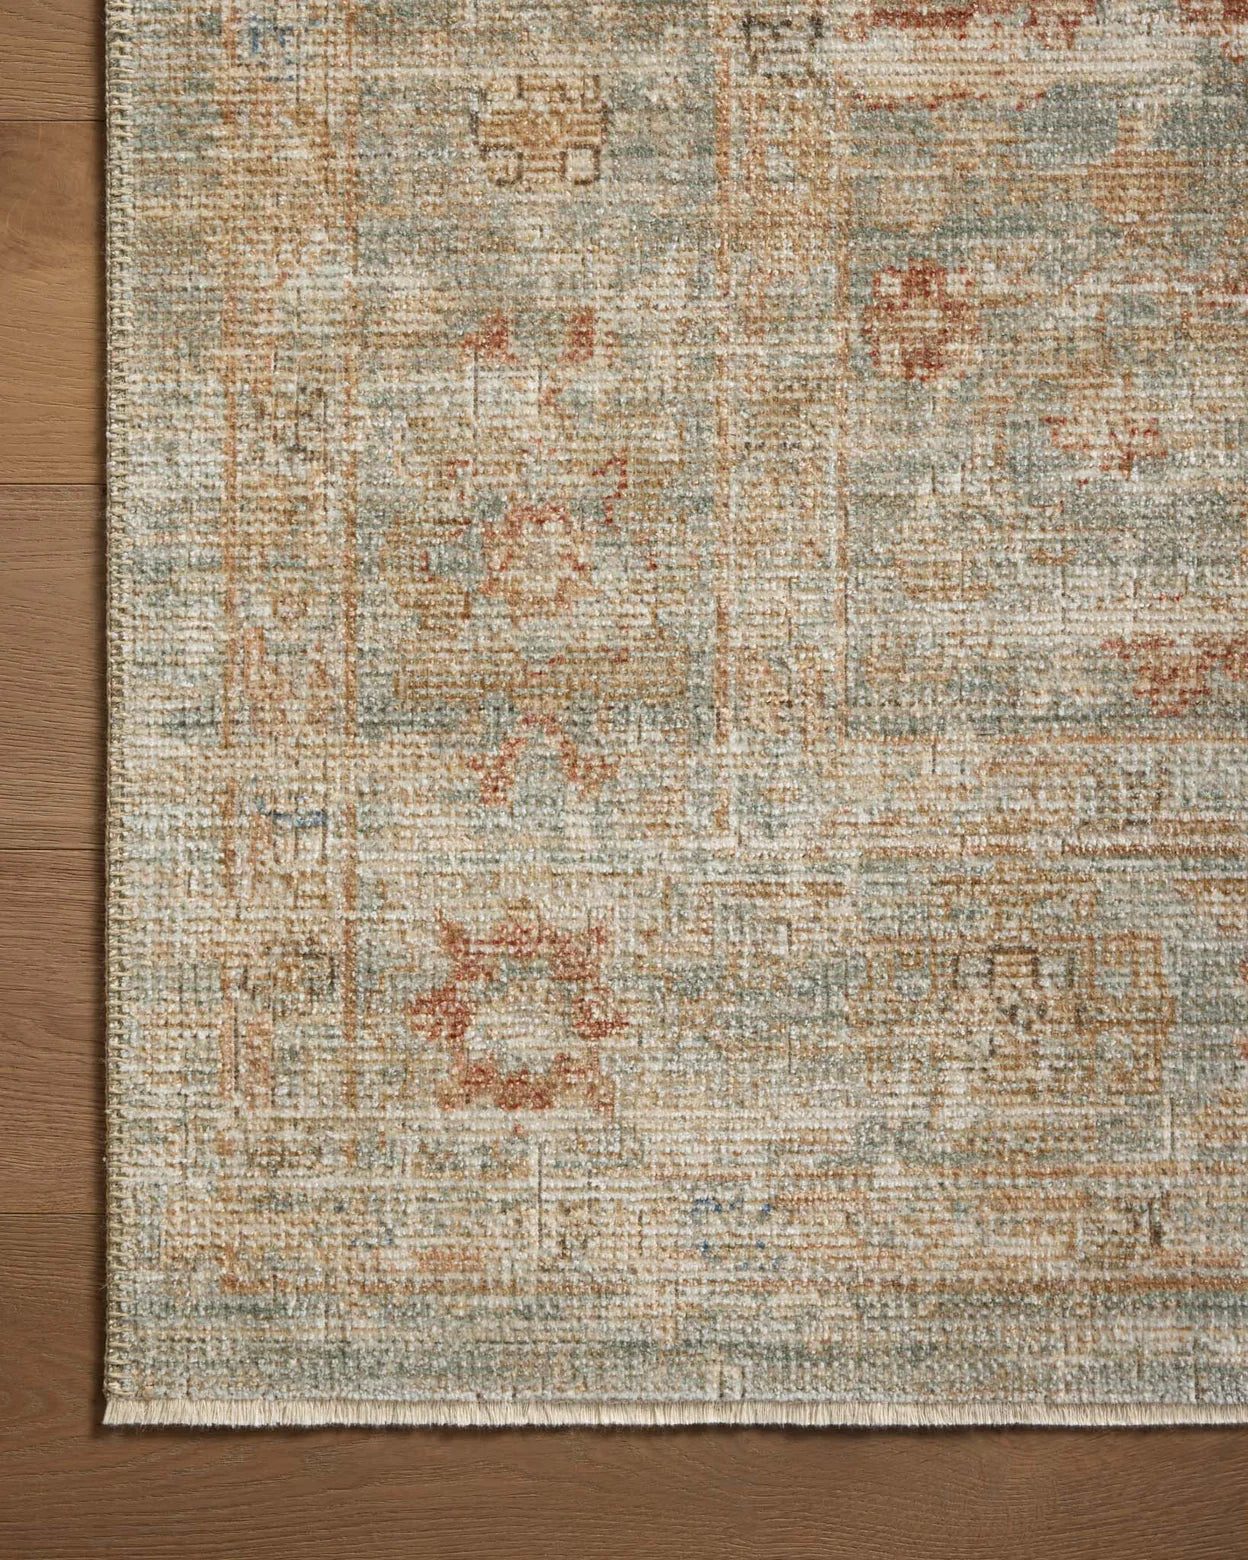 A detailed Loloi Rugs Aqua/ Terracotta Rug with a distressed texture features muted tones of beige and blue, interspersed with subtle red and tan accents, laid on a wooden floor in Arizona style.